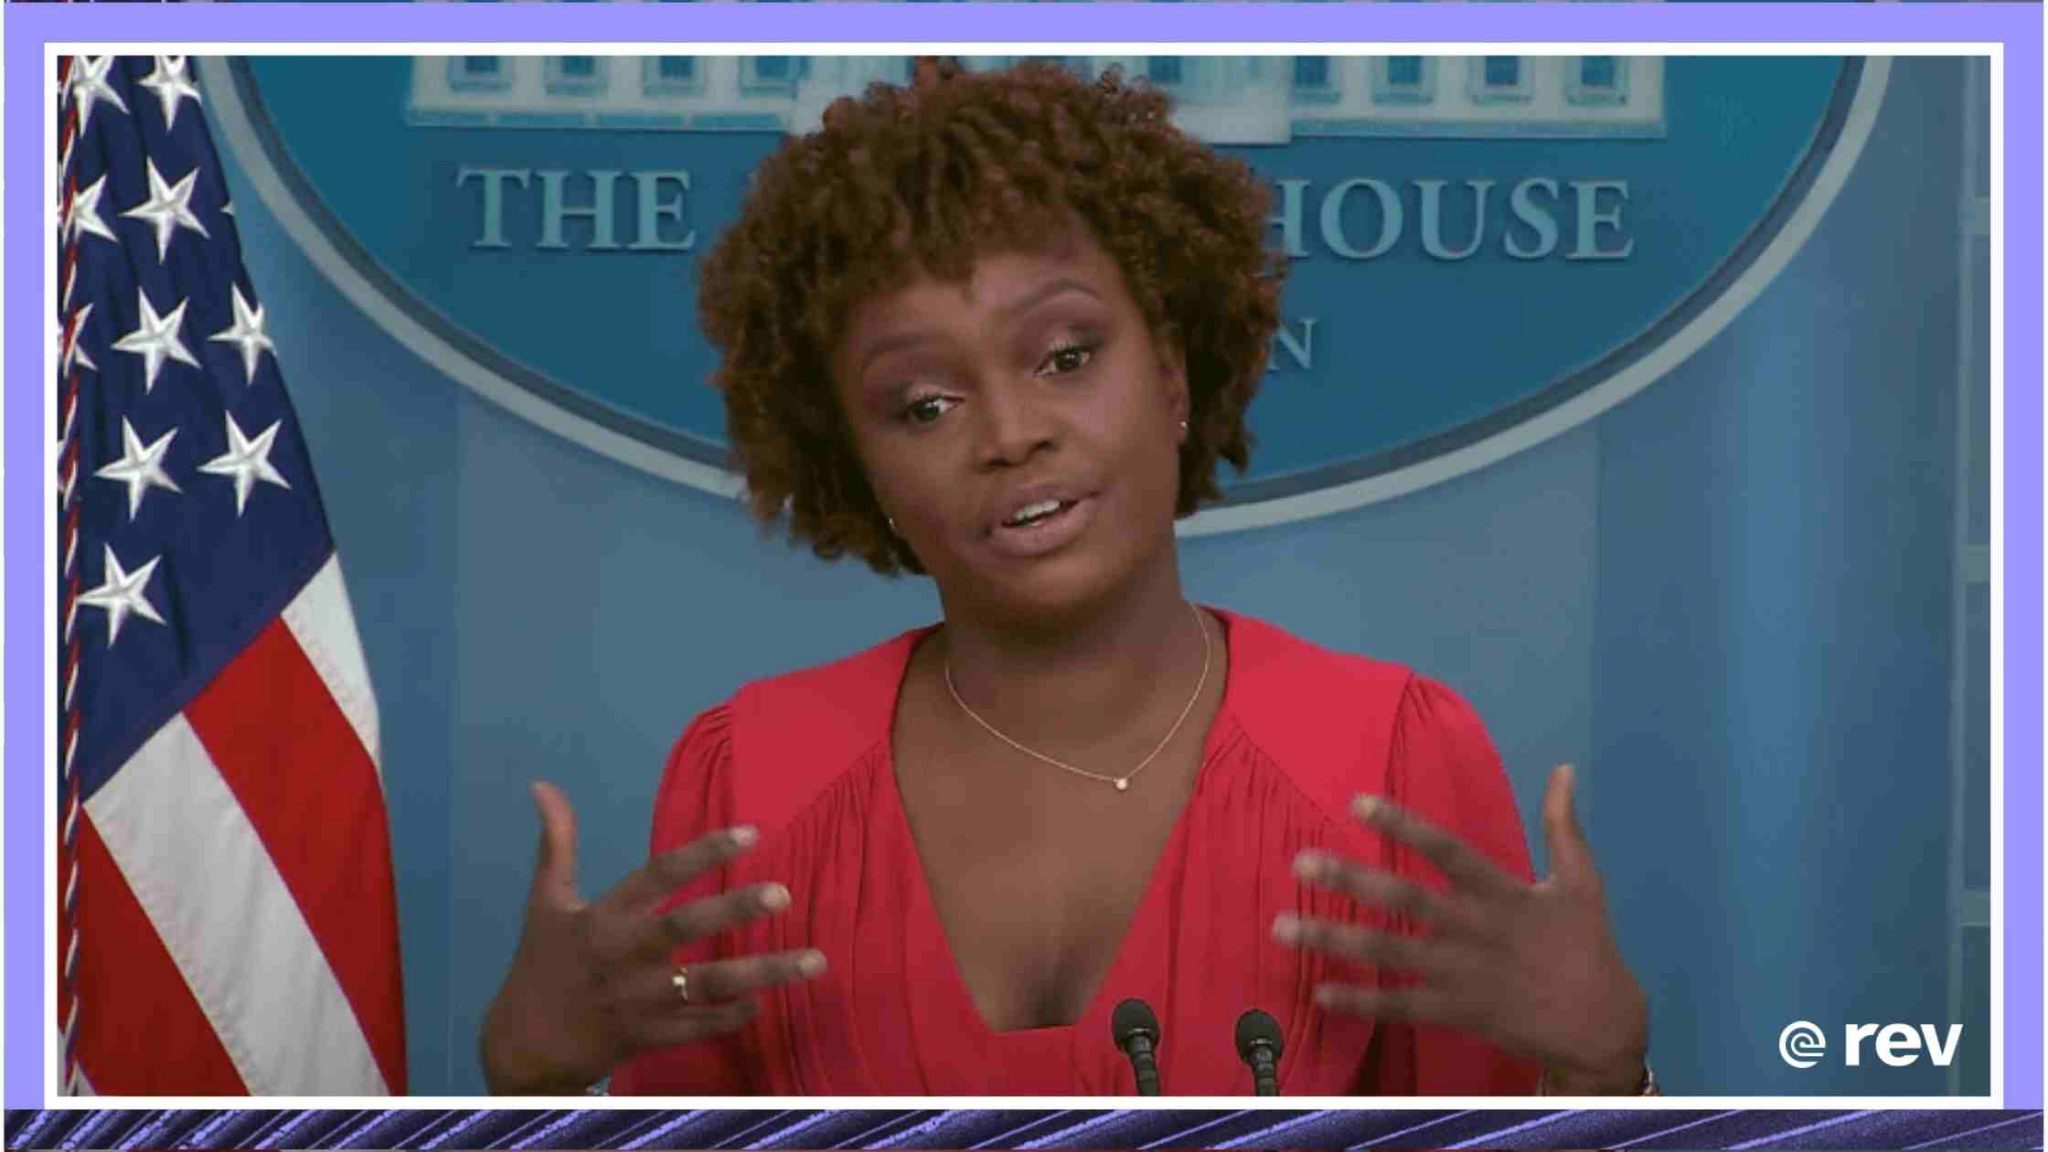 Karine Jean-Pierre Delivers Her First White House Press Briefing on 5/16/22 Transcript